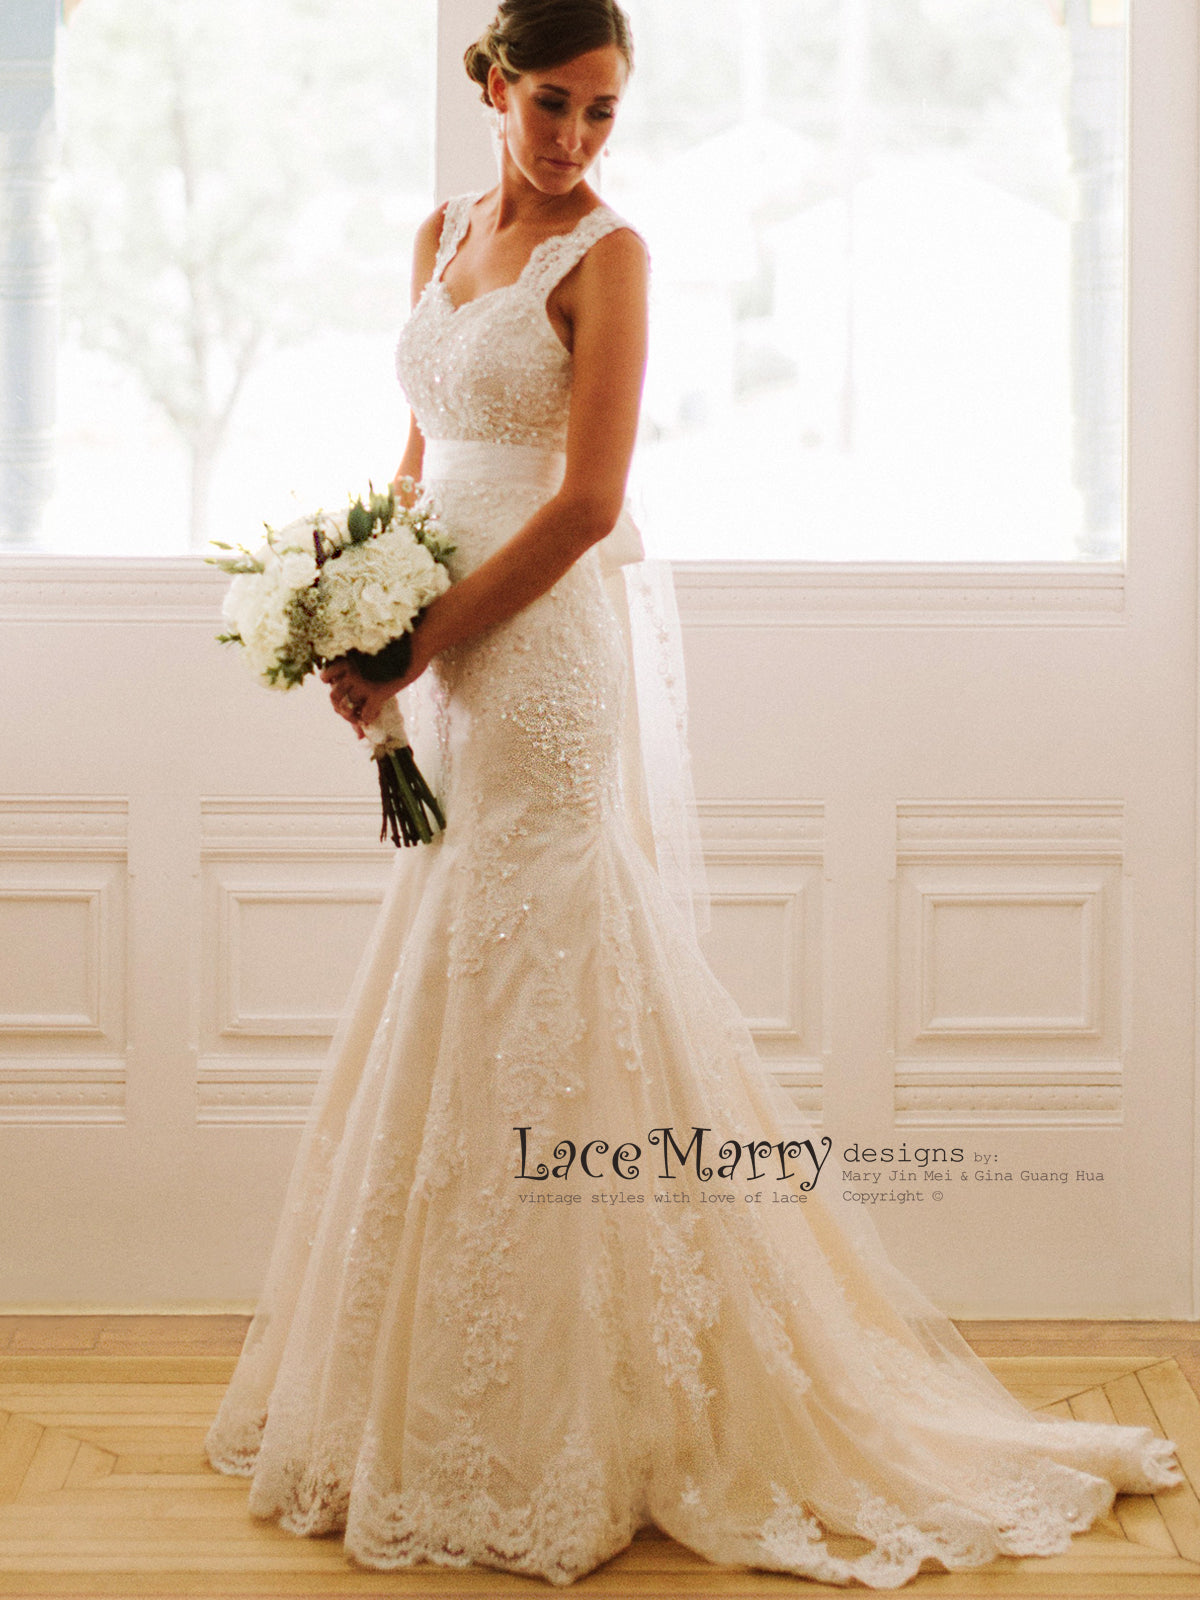 Beaded Lace Wedding Dress in Fit and Flare Shape with Sweetheart Neck -  LaceMarry